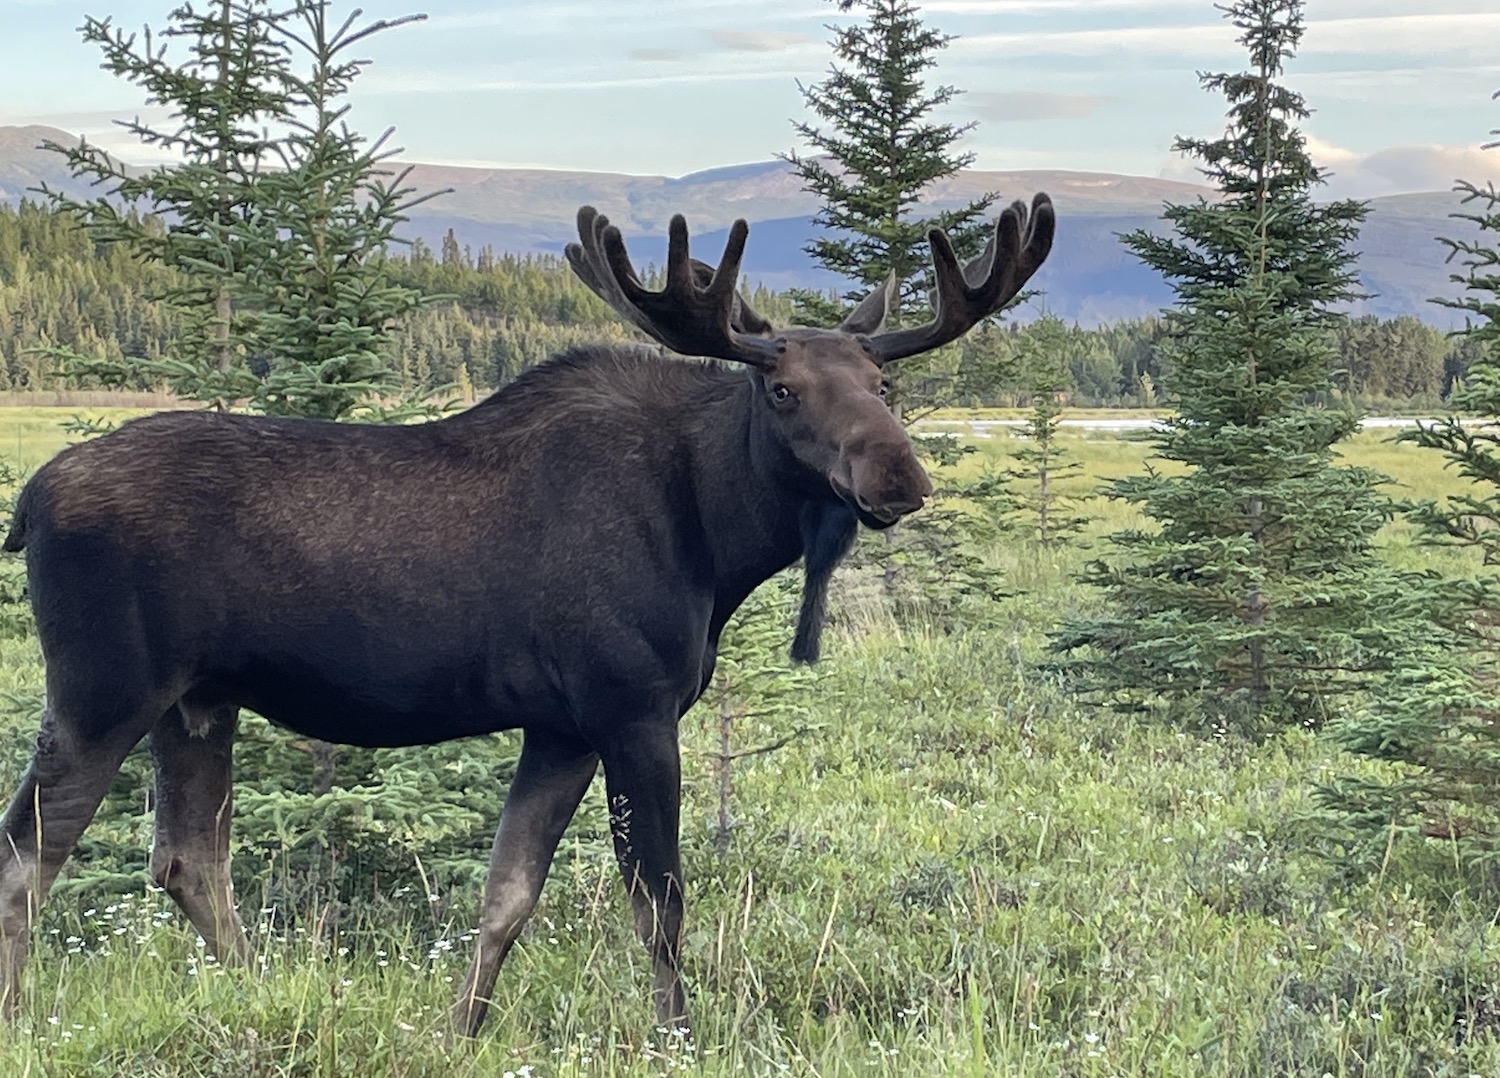 A bull moose stands in front of a green field with hills and mountains in the background.